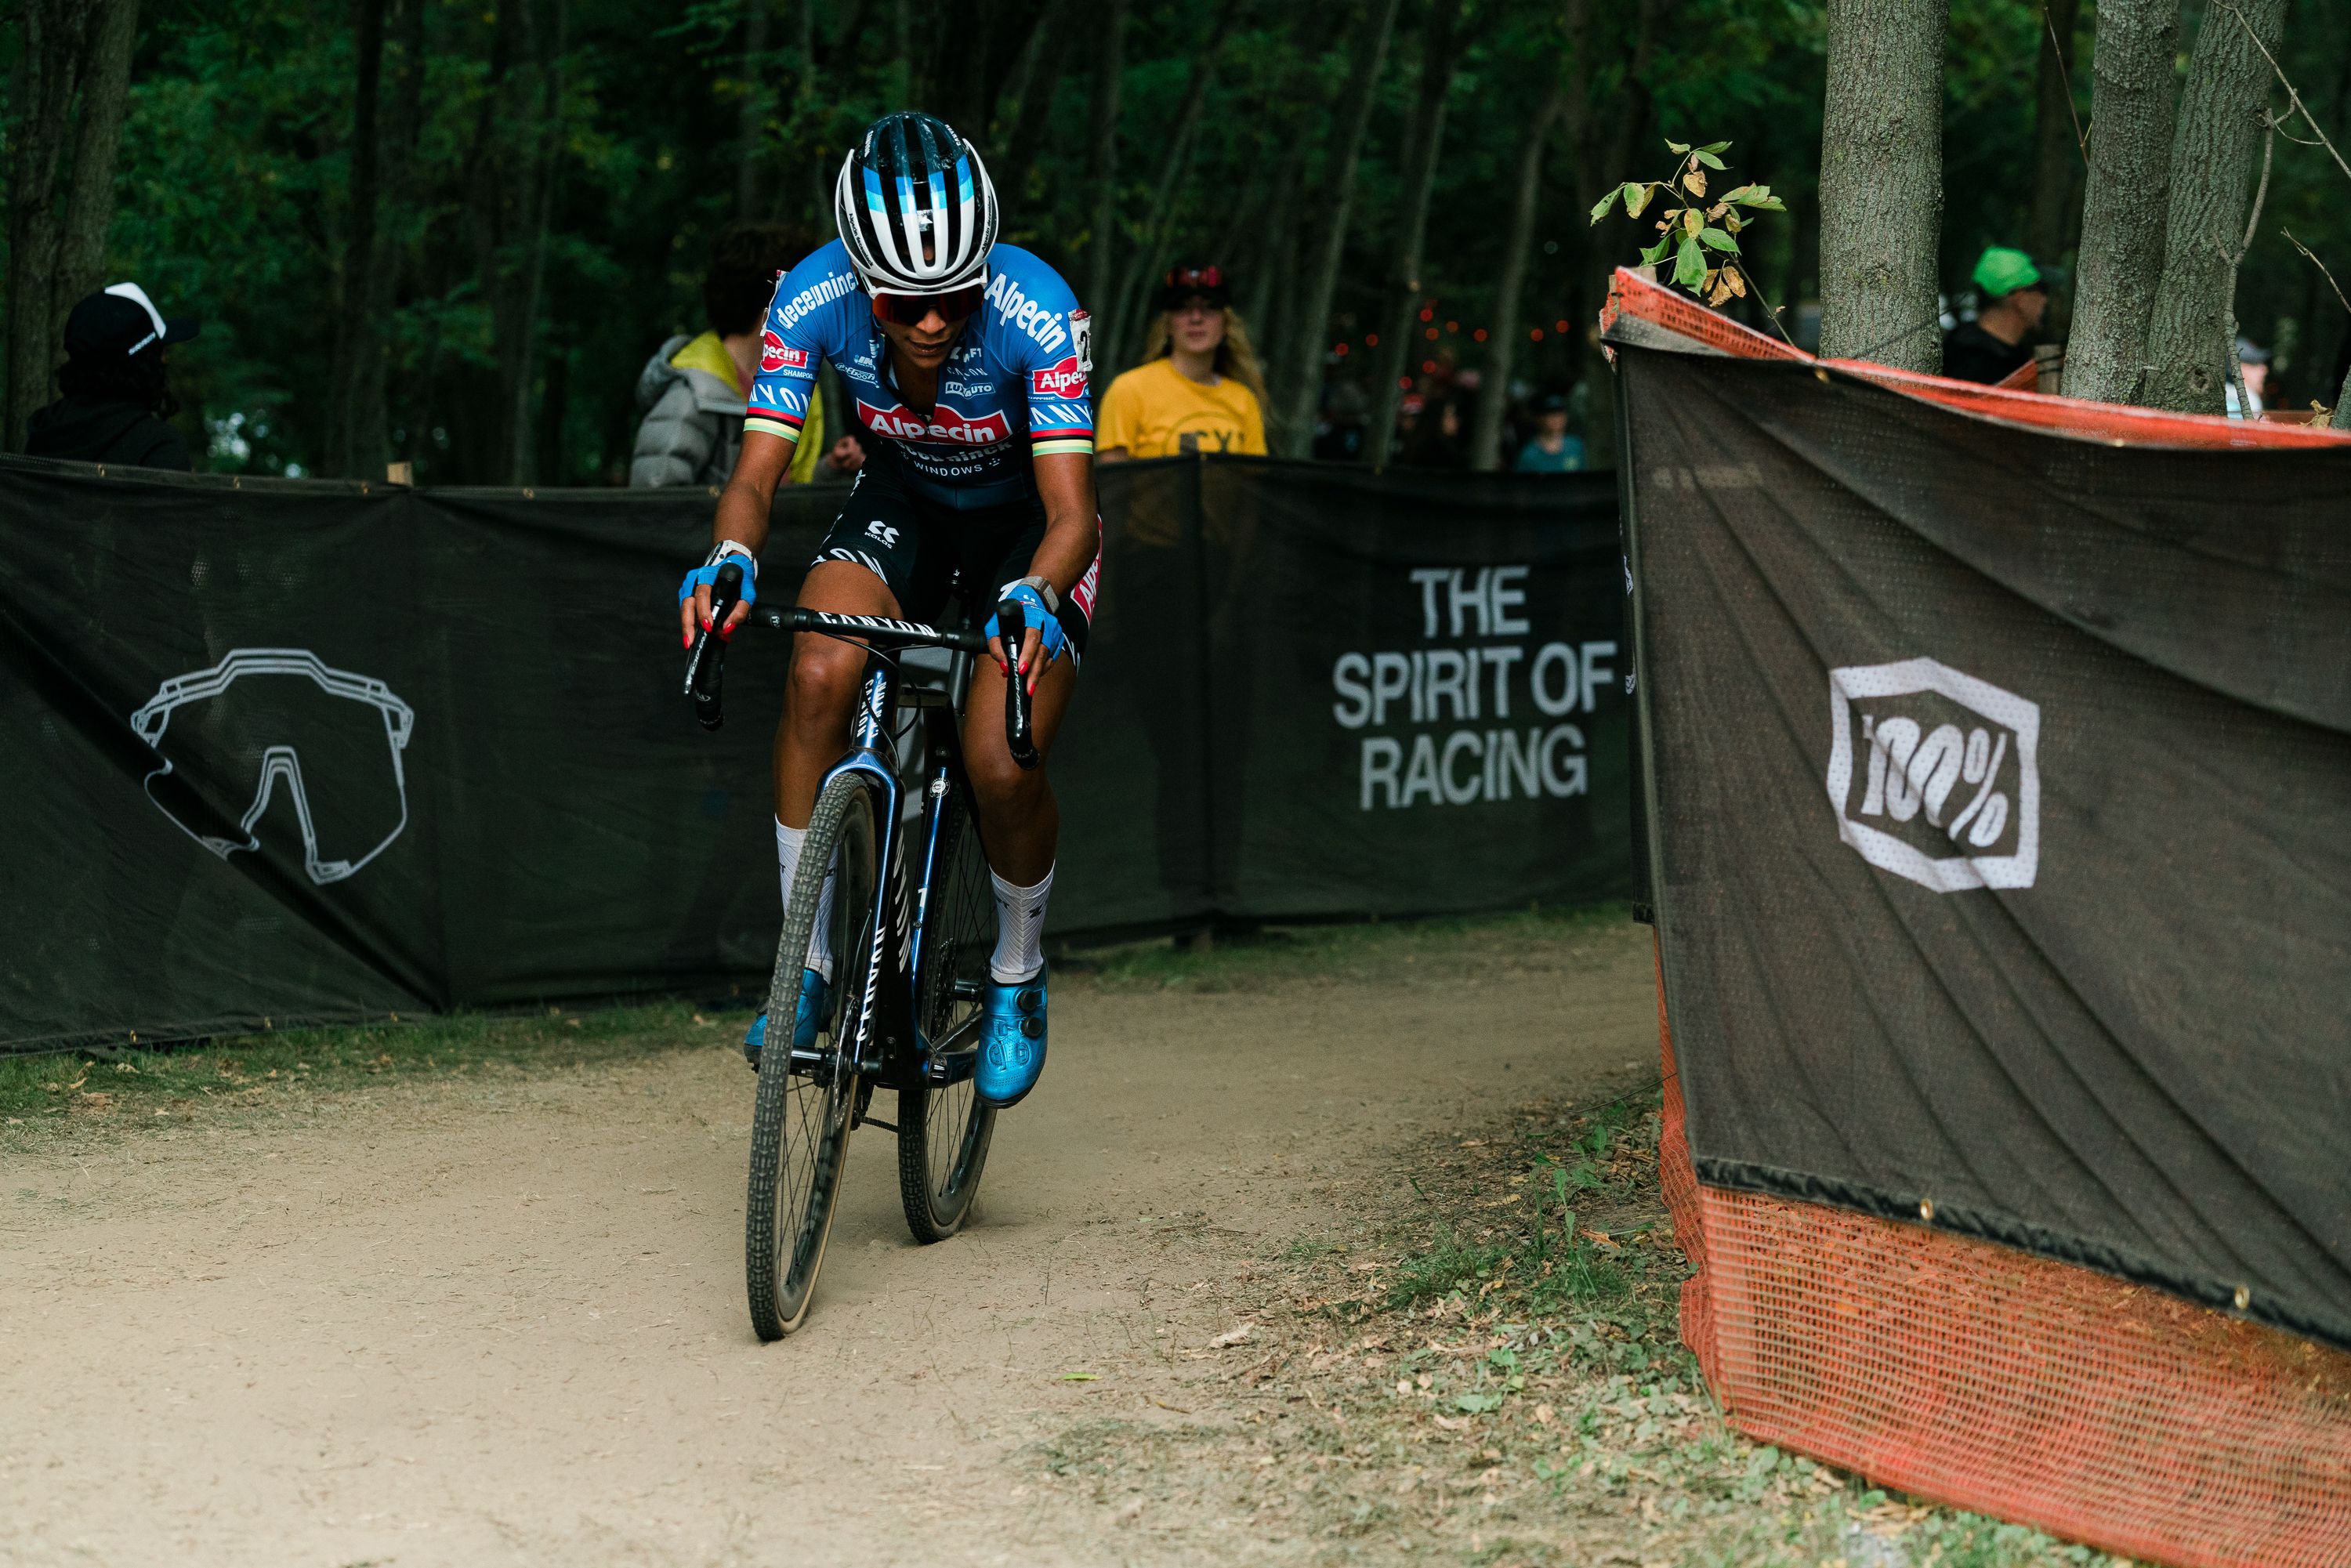 Cyclocross Fandom Is Alive and Well—The Trek World Cup in Waterloo Proves It